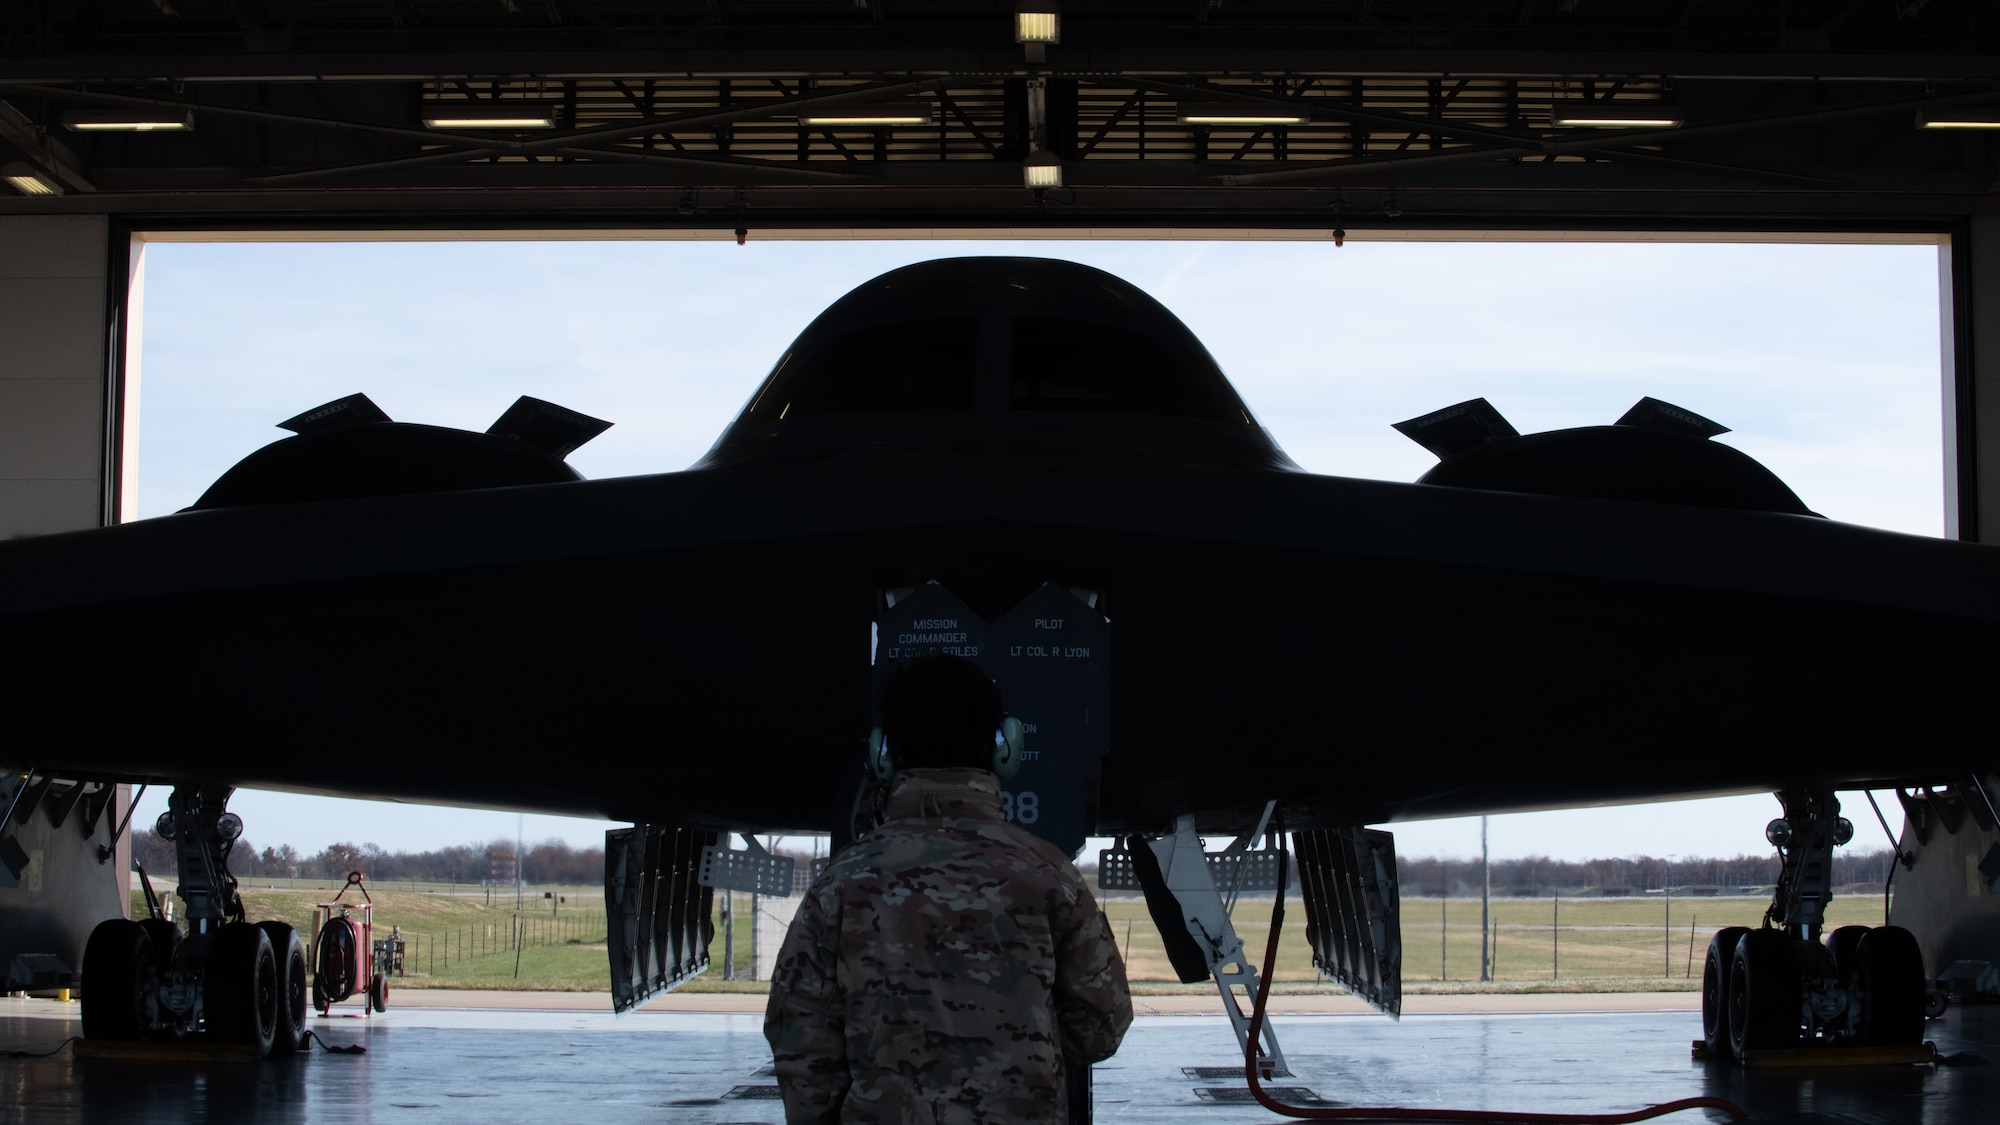 A 509th Bomb Wing maintainer prepares a B-2 Spirit stealth bomber for takeoff at Whiteman Air Force Base, Missouri, Nov. 7, 2022. Maintainers at Whiteman AFB perform exercises to keep the B-2 ready to fly anytime, anywhere. (U.S. Air National Guard photo by Airman 1st Class Phoenix Lietch)